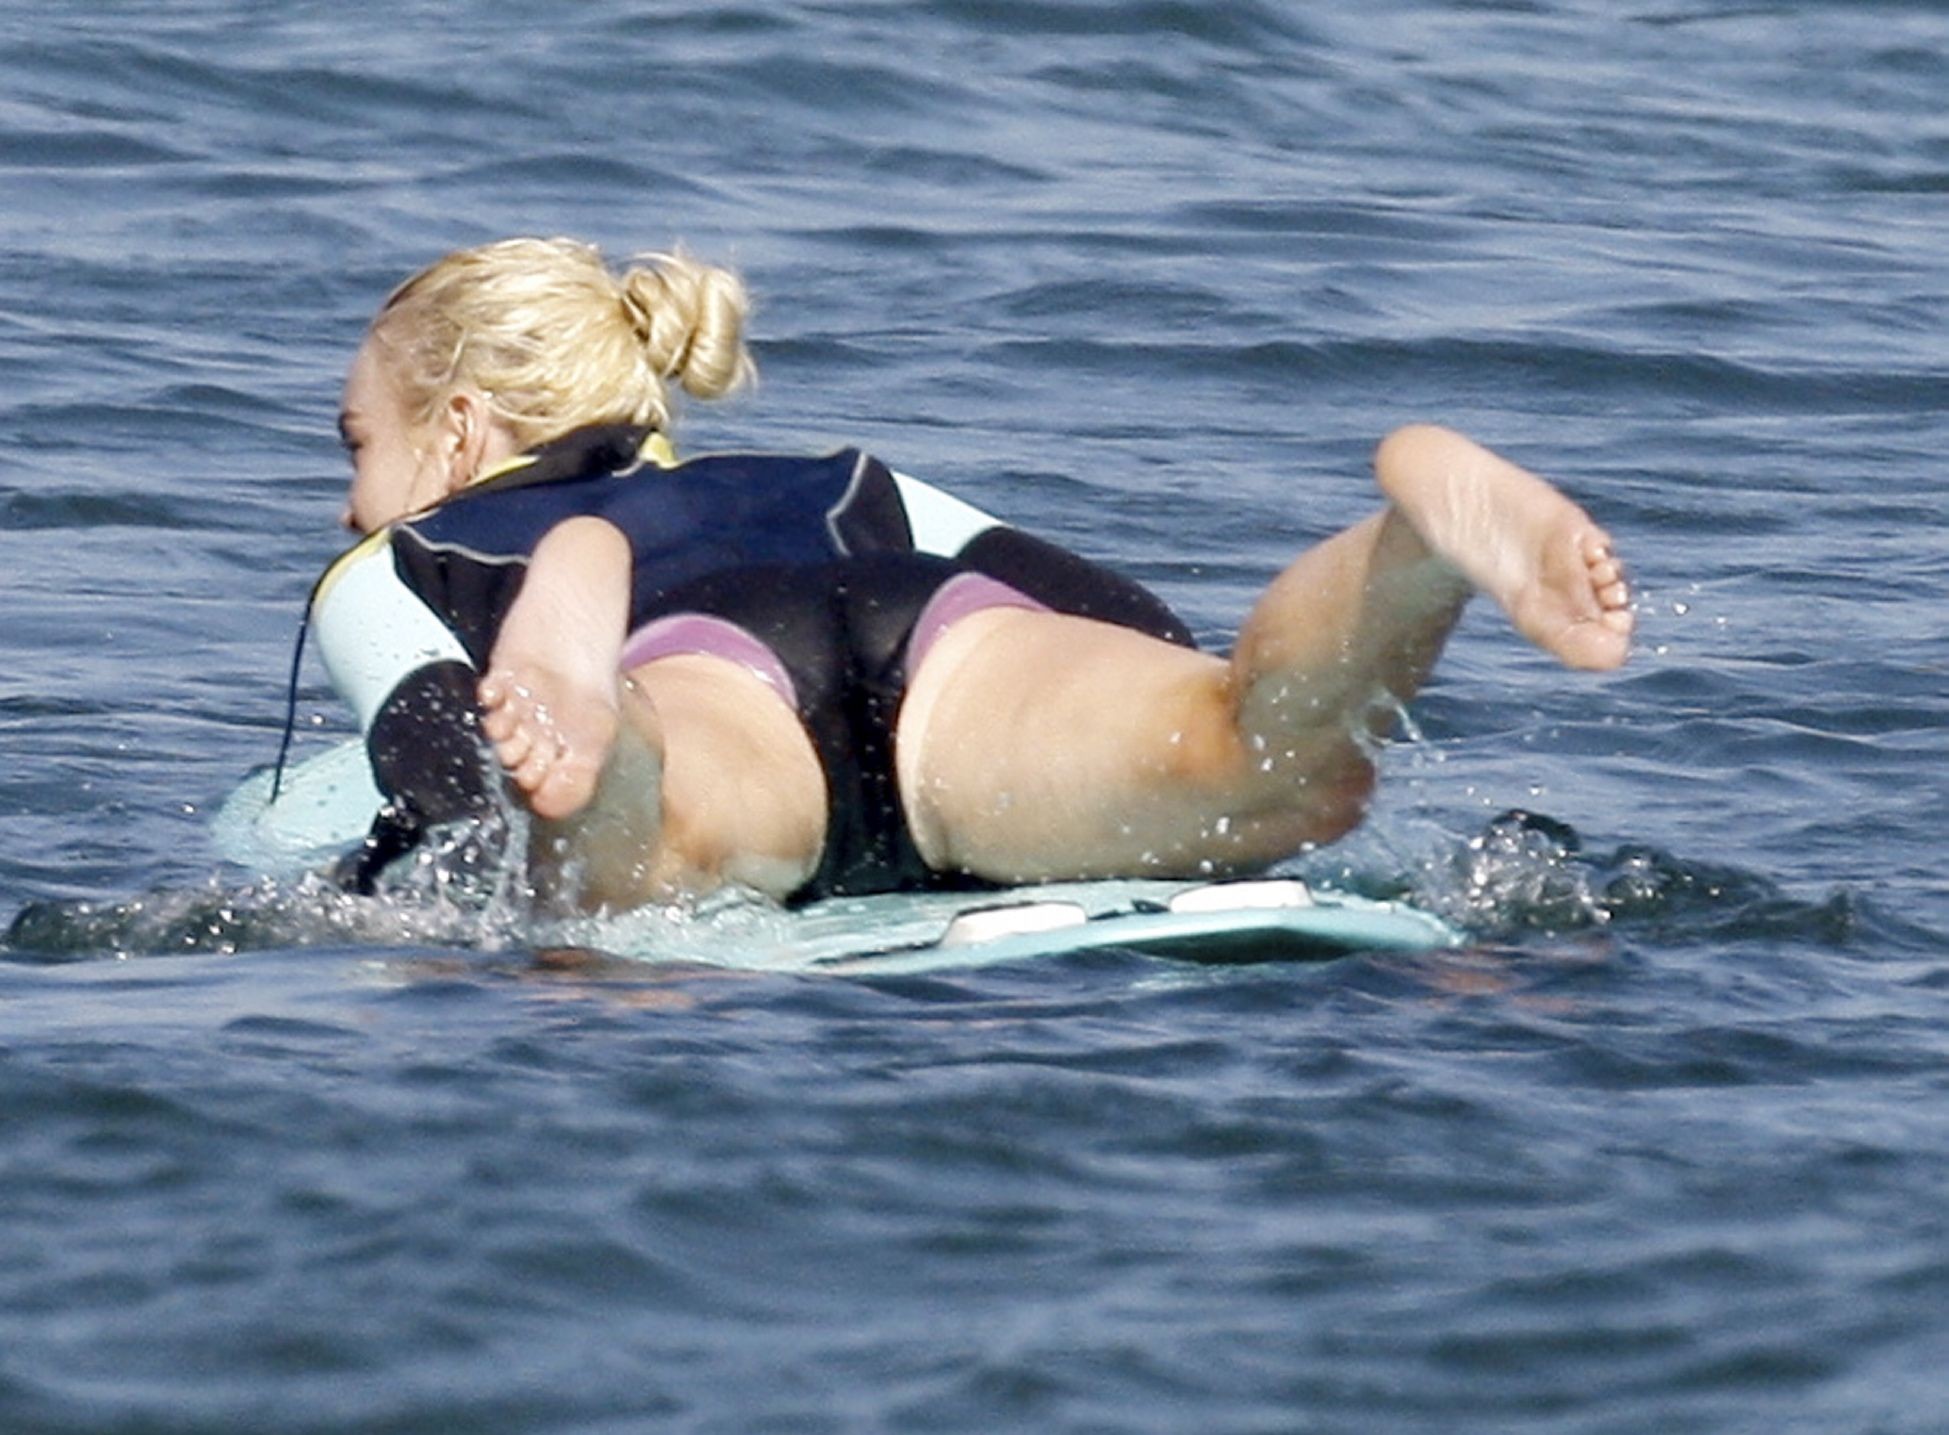 Lindsay Lohan shows off her ass while  after surfing in Malibu #75291021